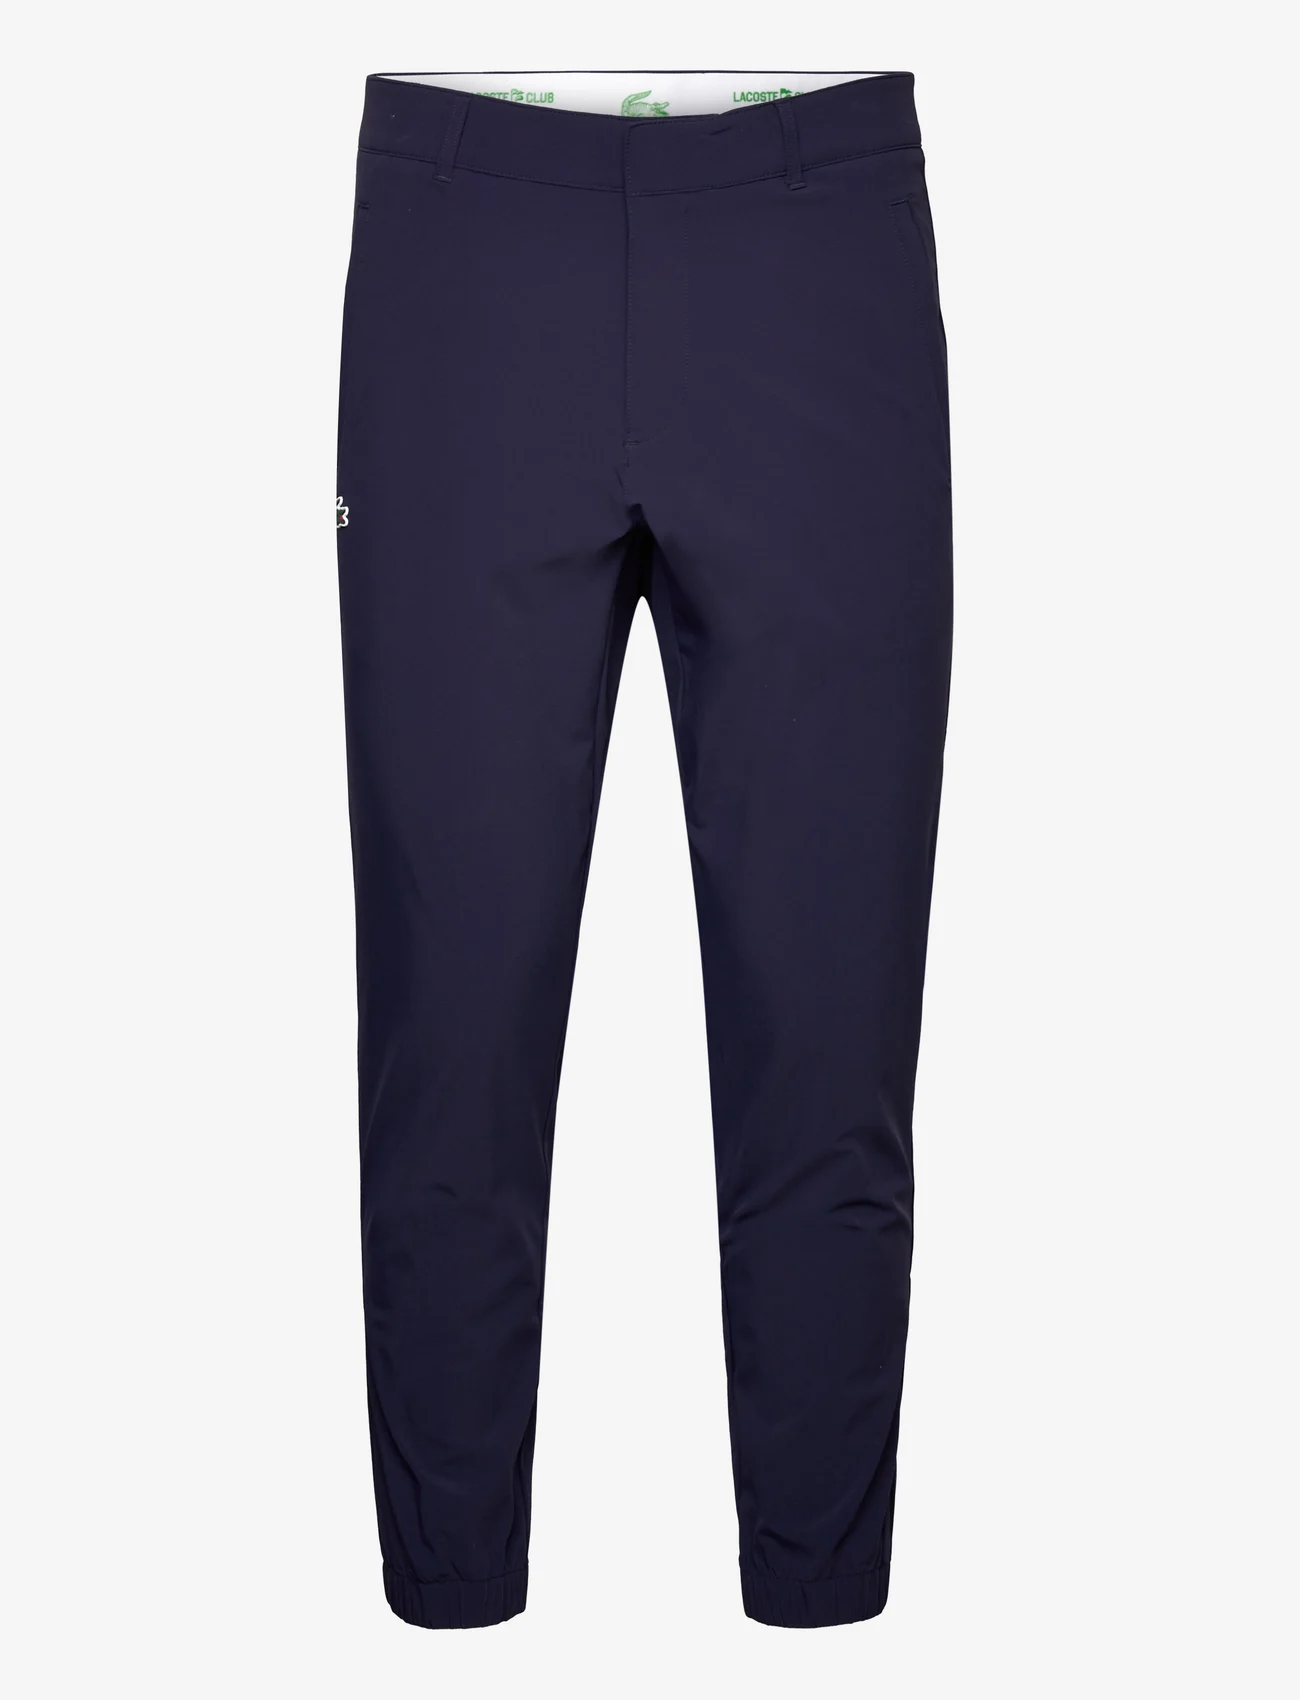 Lacoste - TROUSERS - golfhosen - navy blue - 0